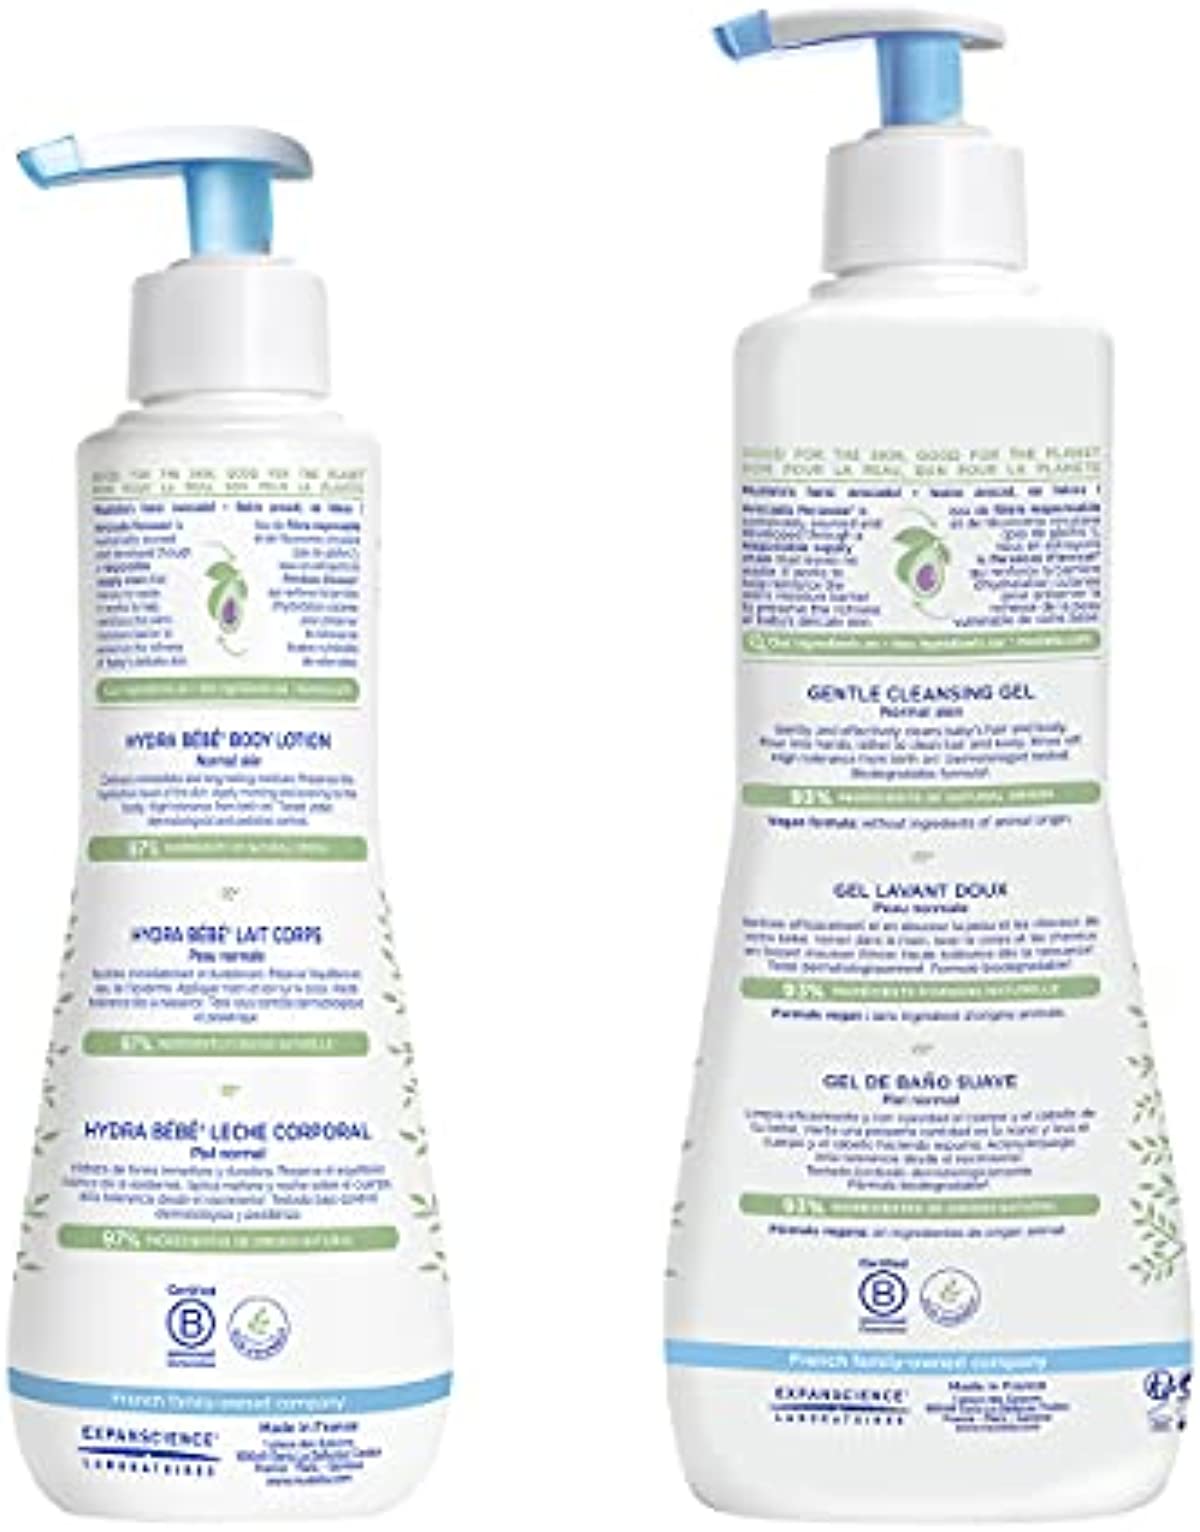 Mustela Baby Bath Time Gift Set - Baby Skin Care Essentials with Natural Avocado - Contains Hydra Bebe Body Lotion 10.14 fl. oz. & Gentle Cleansing Gel 16.9 fl. oz. - 2 Items Set